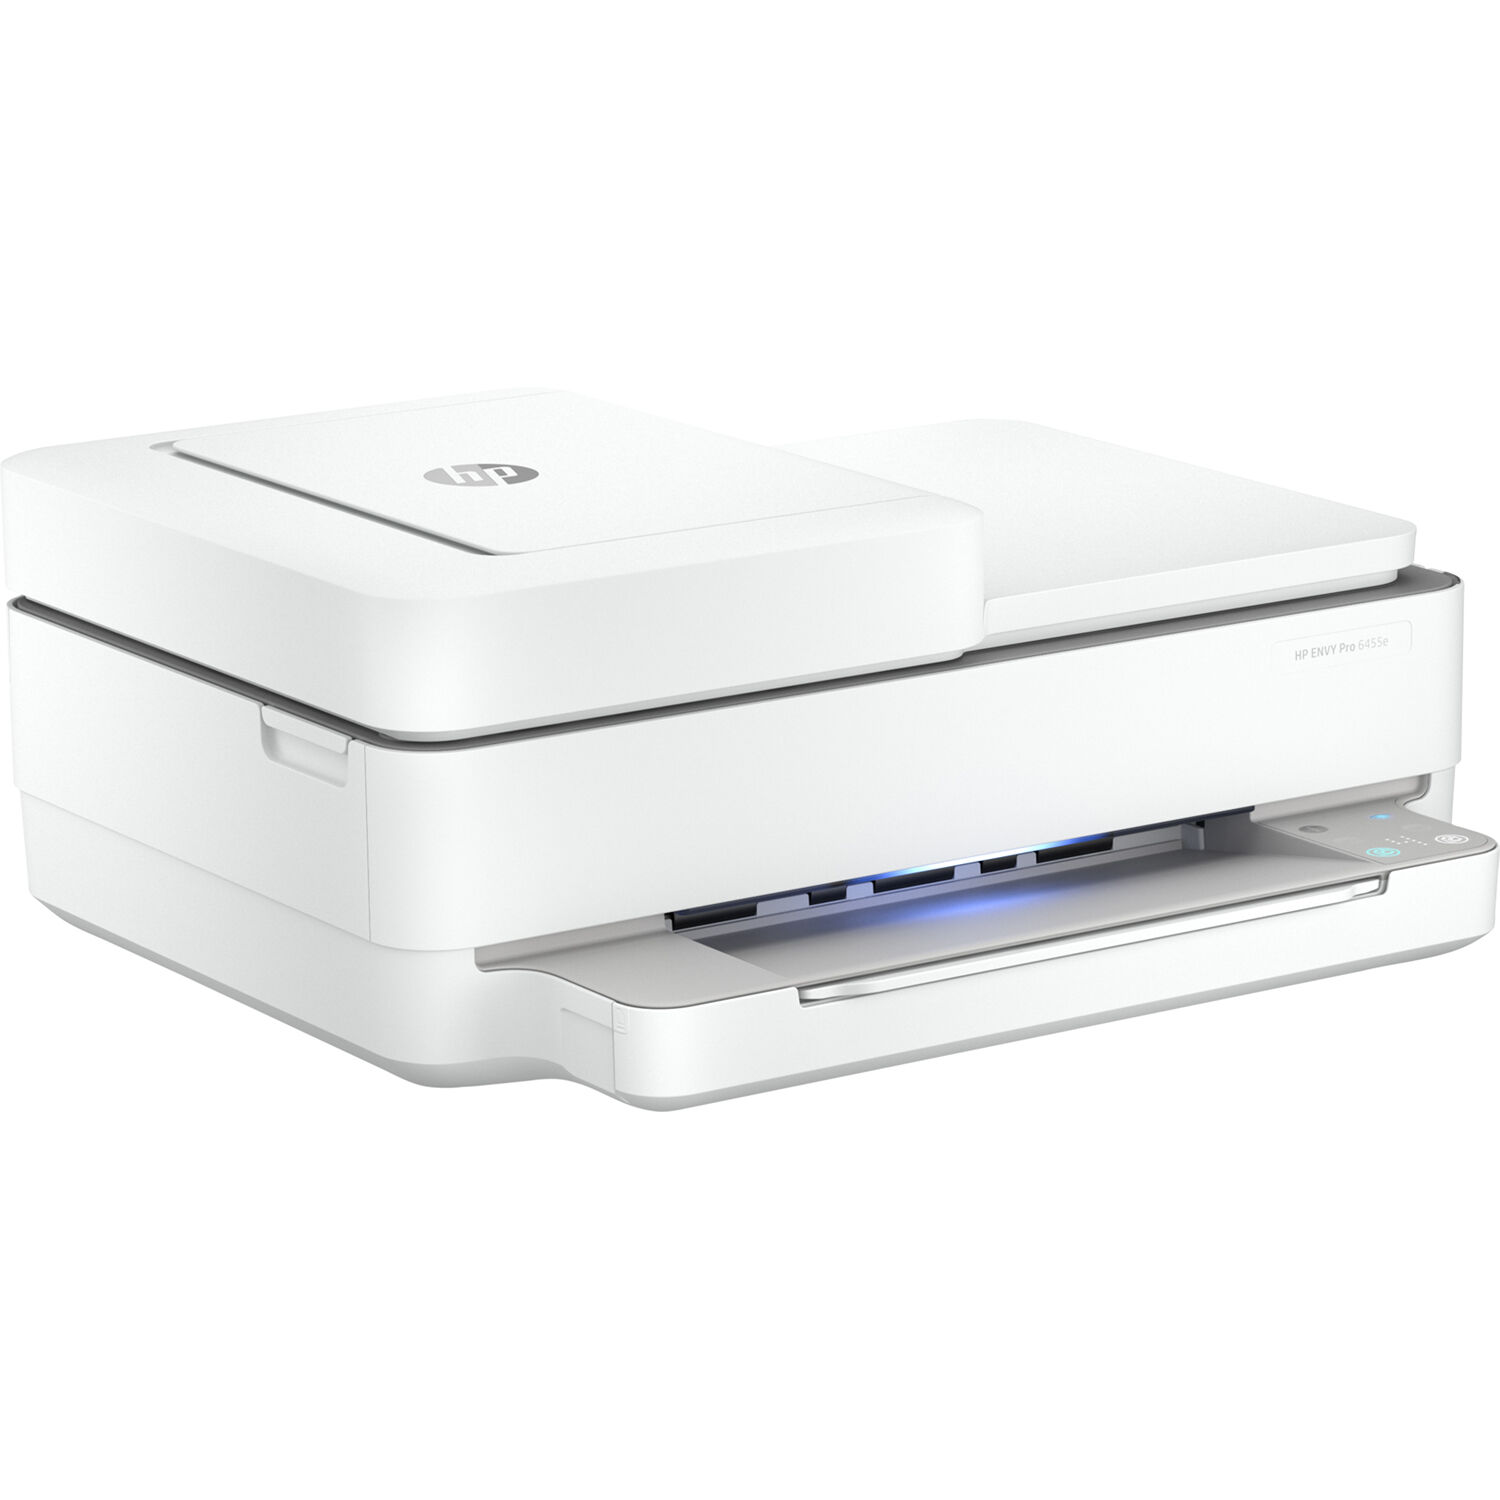 ENVY Pro 6455 All-in-One Printer